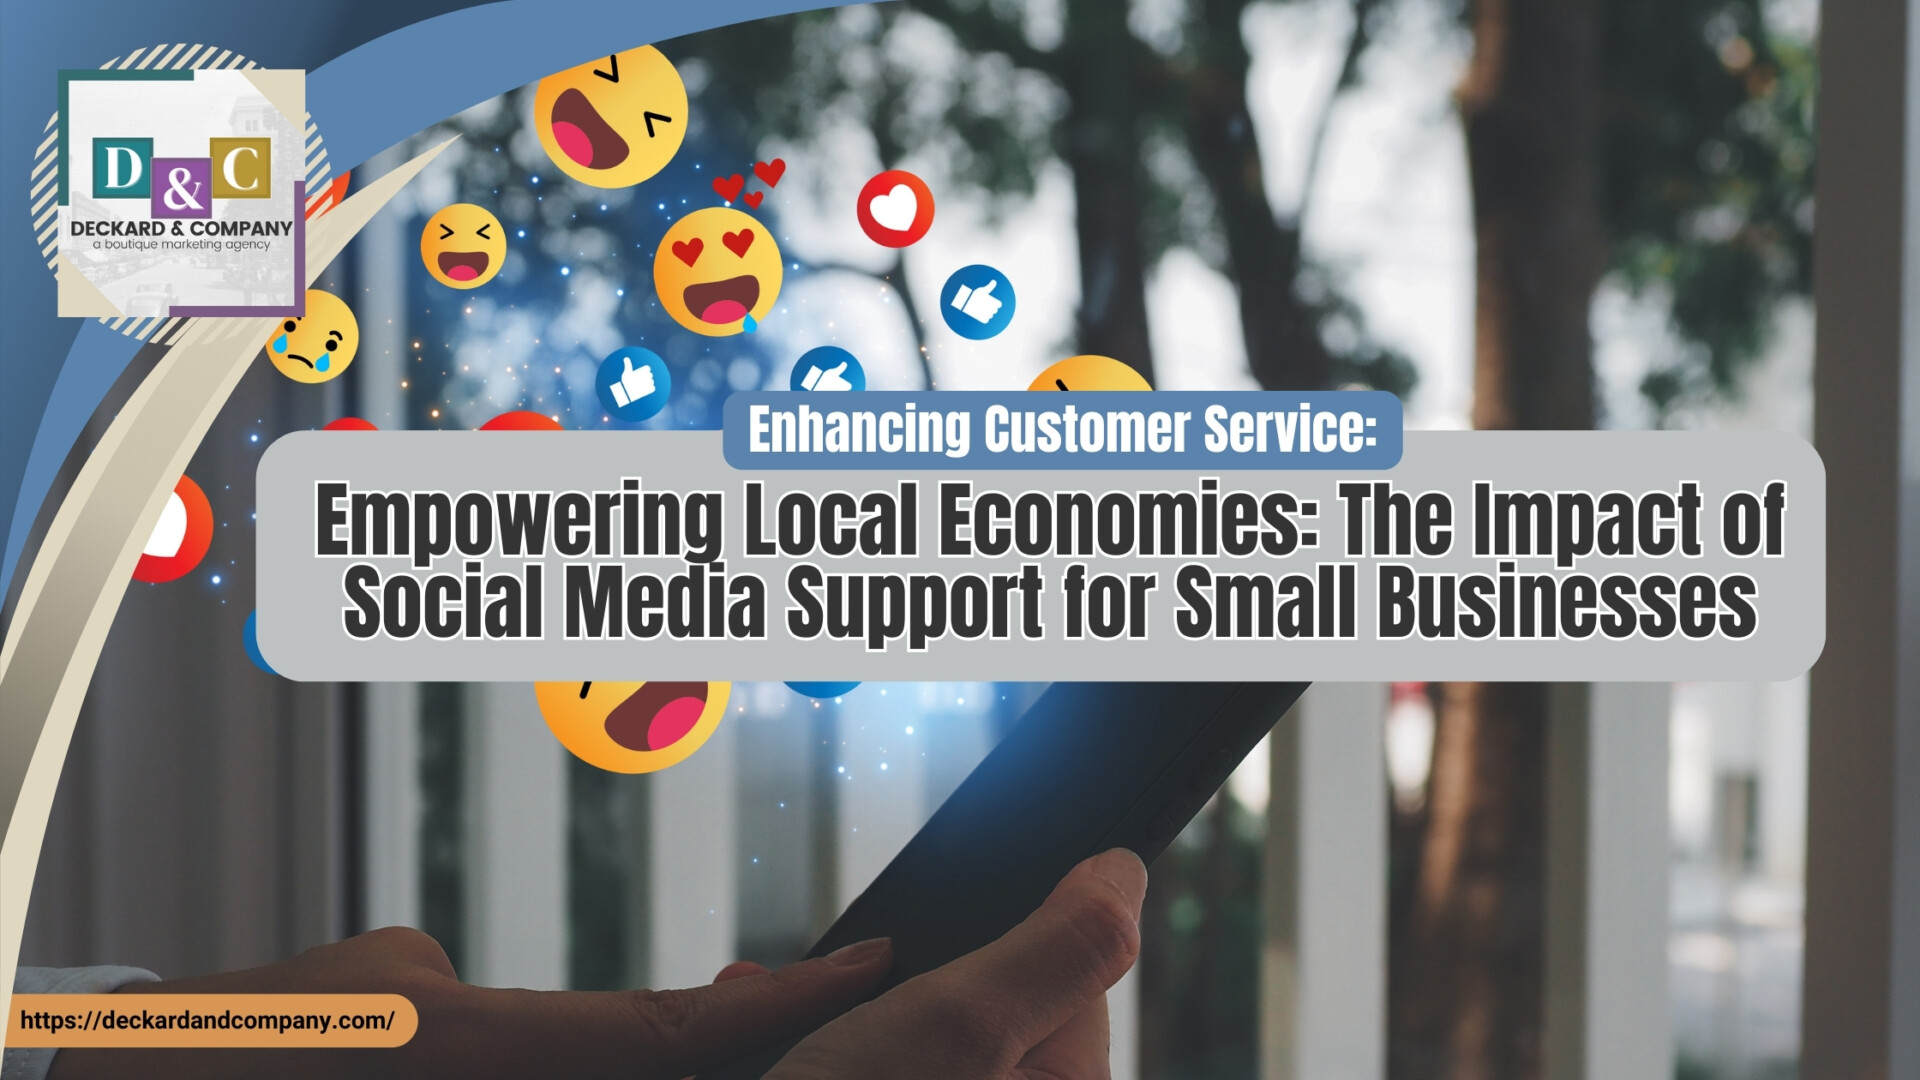 Empowering Local Economies The Impact of Social Media Support for Small Businesses - Deckard & Company a Boutique Marketing Agency